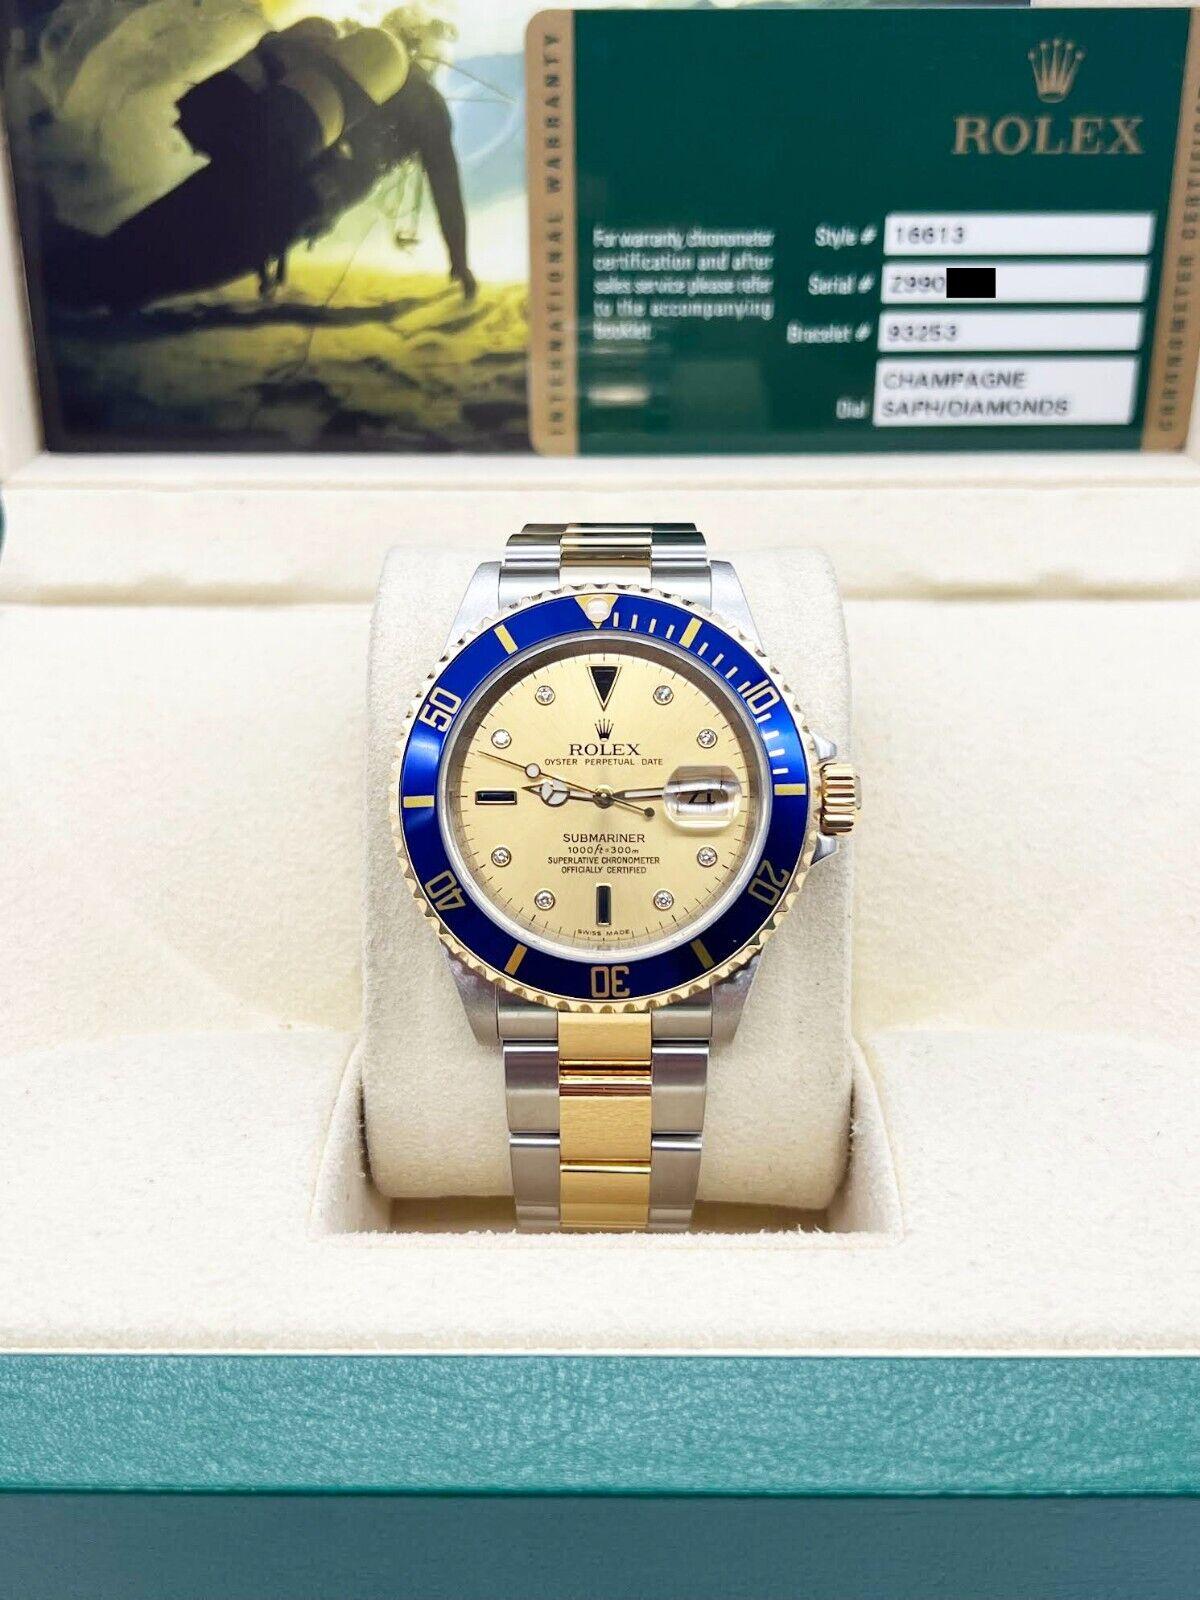 Rolex Submariner 16613 Champagne Serti Dial 18K Yellow Gold Steel Box Paper For Sale 6